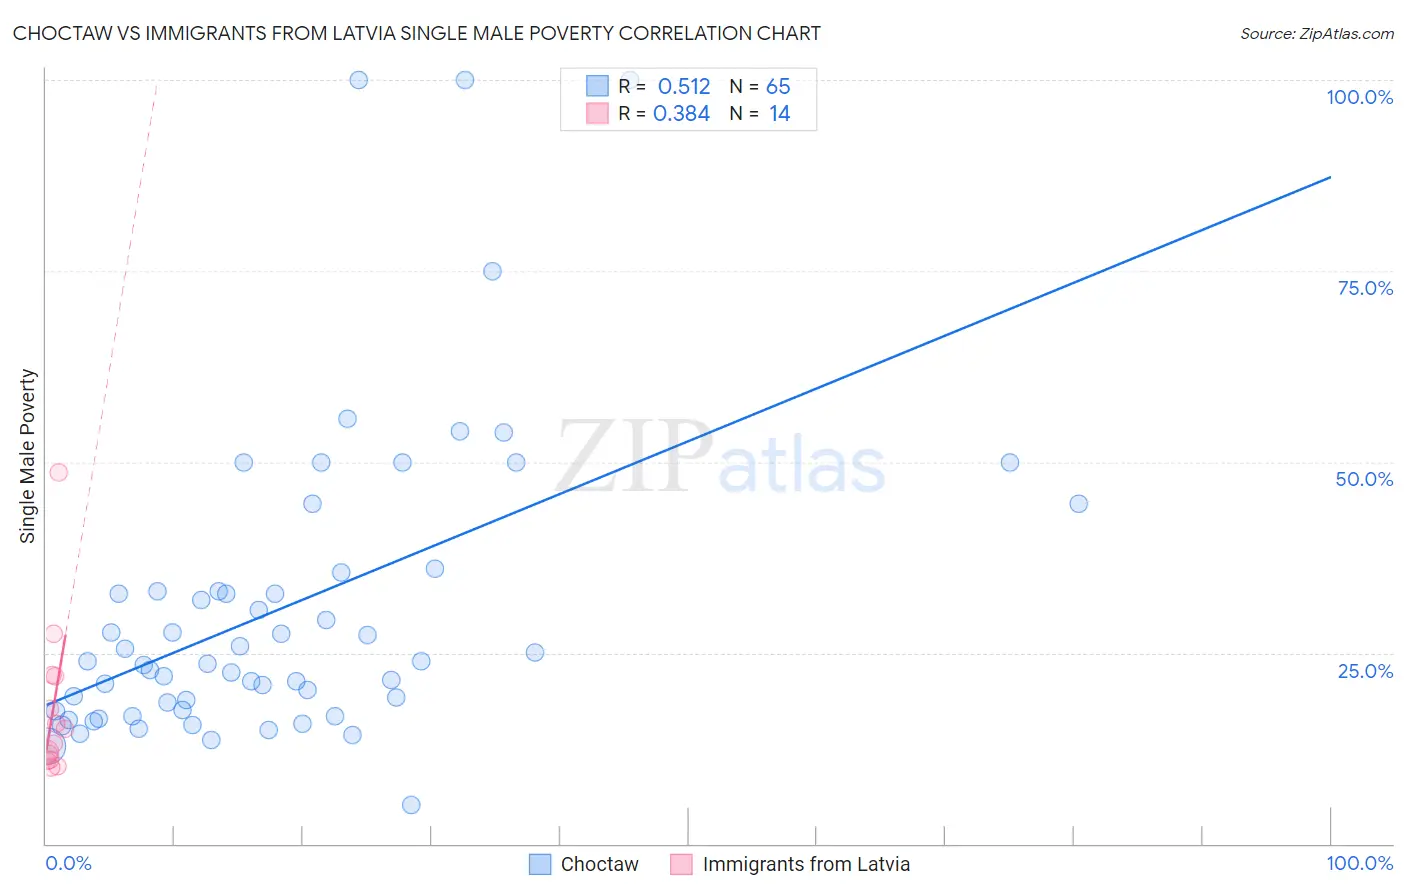 Choctaw vs Immigrants from Latvia Single Male Poverty